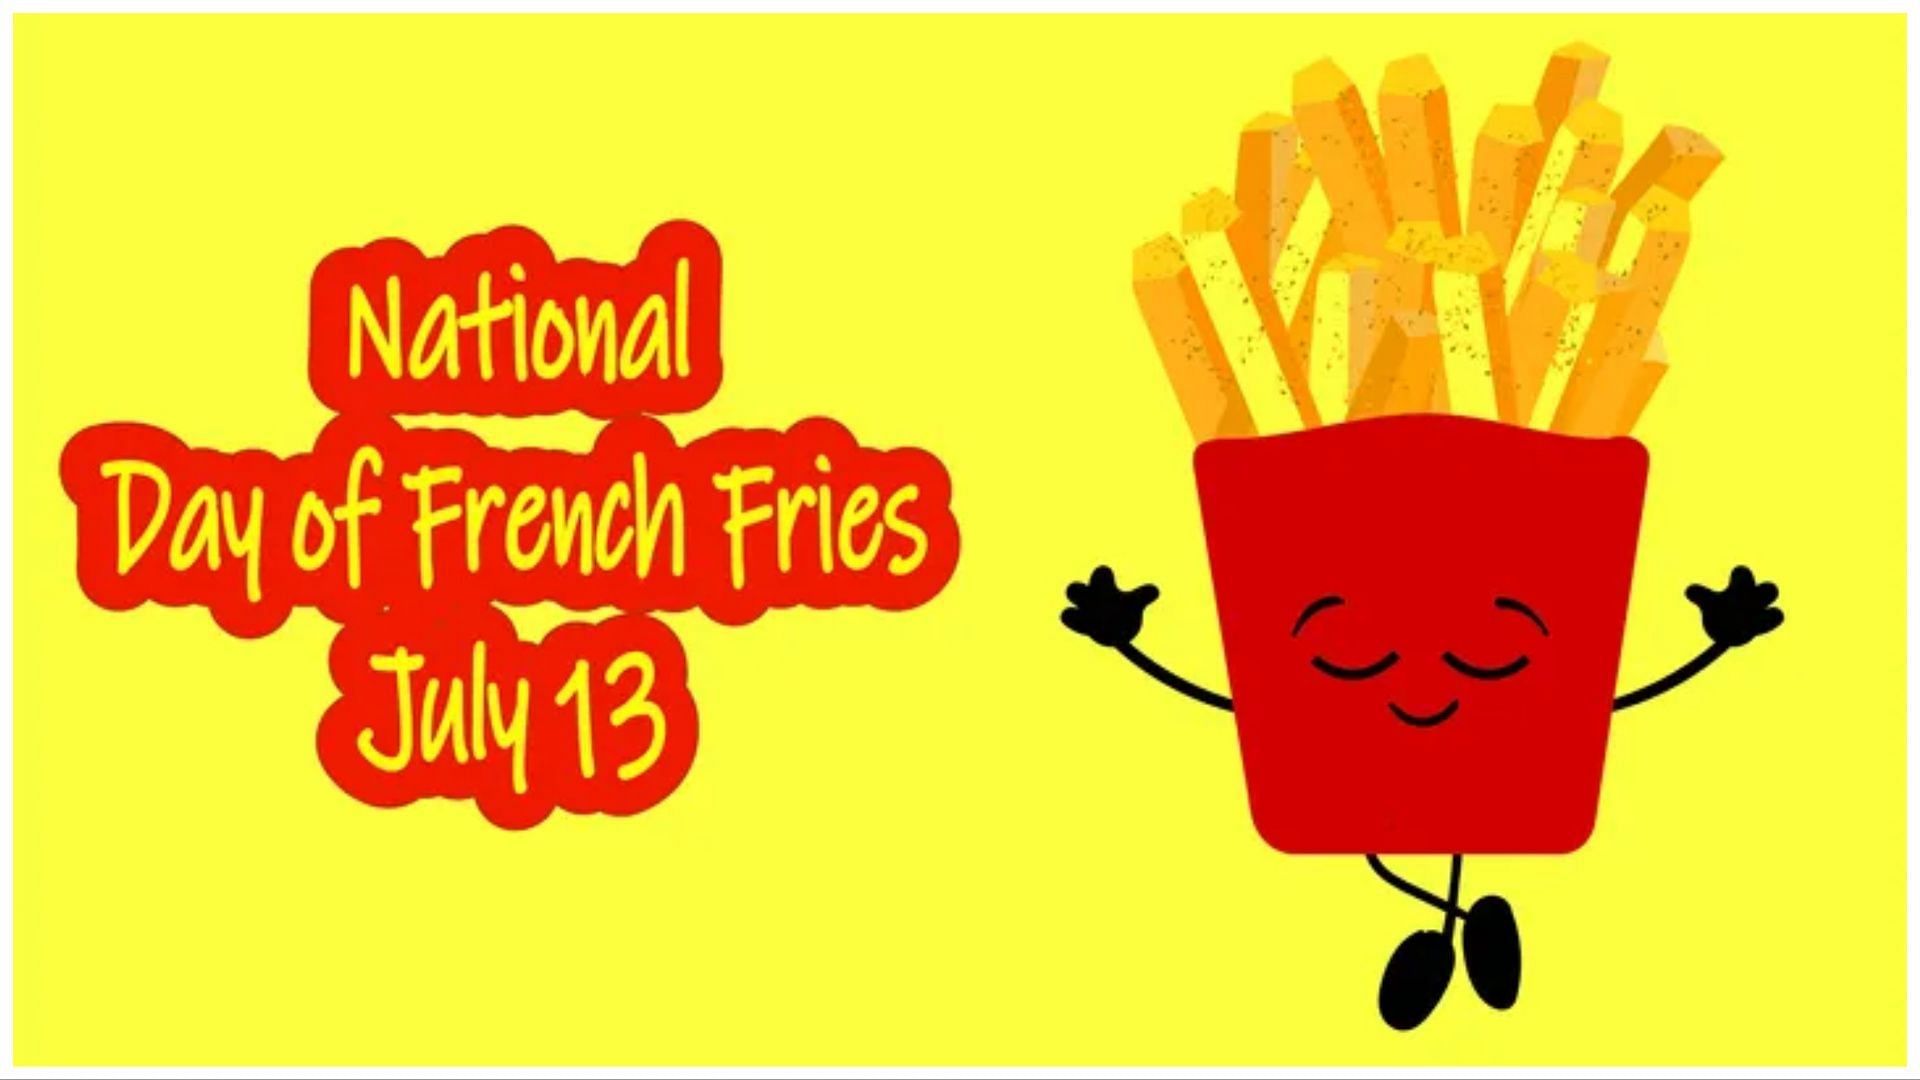 The National French Fries day is almost upon us (Image via Getty Images)